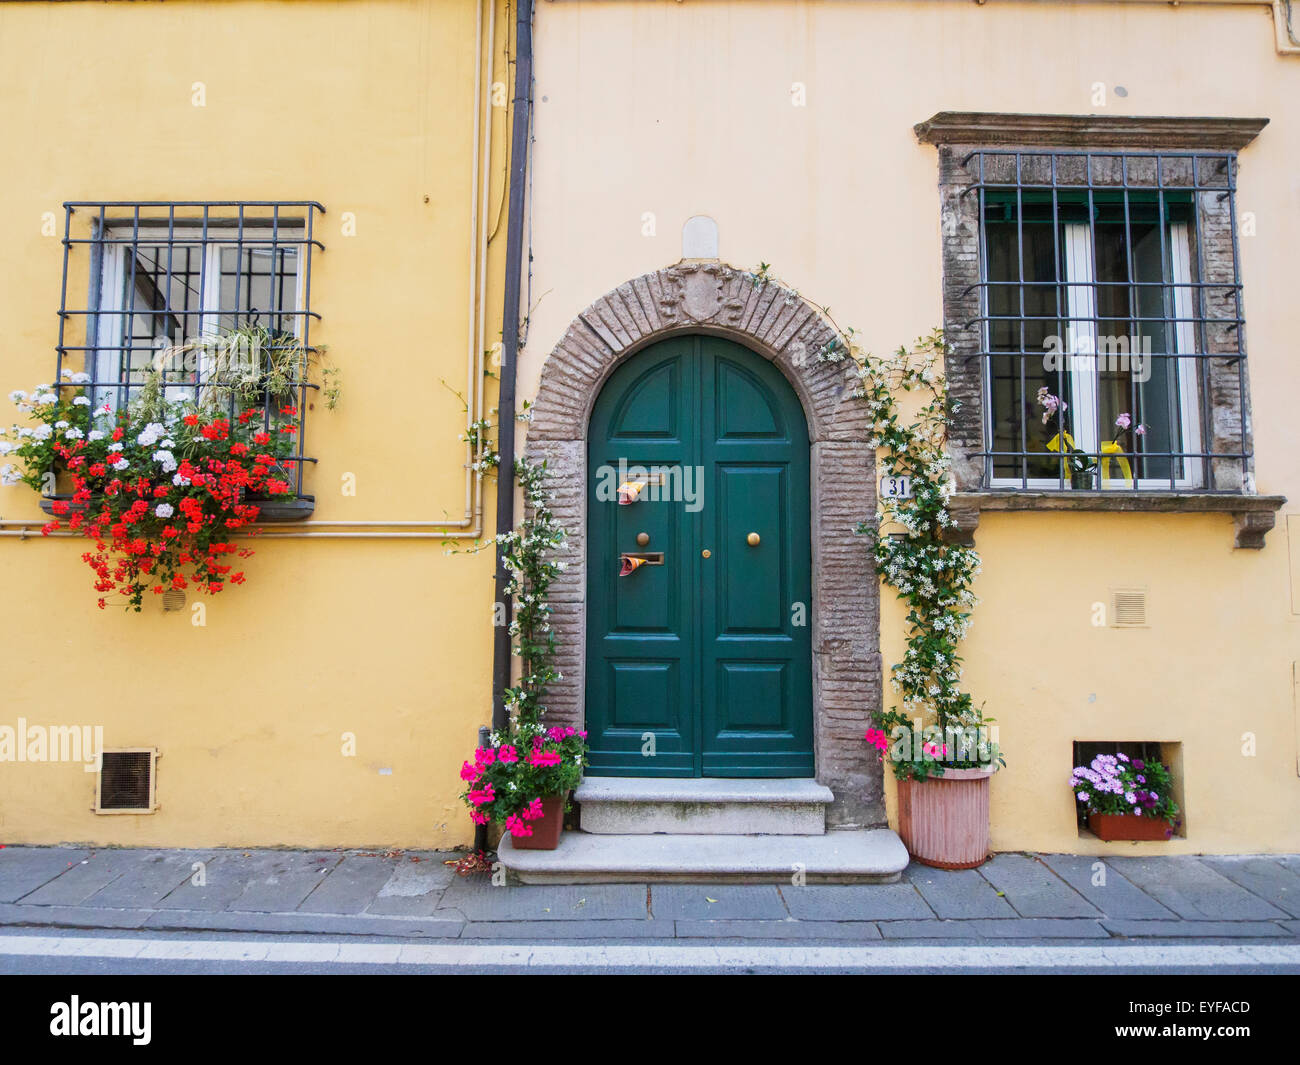 Decorated windows and doors with flowers and vines in springtime; Lucca, Italy Stock Photo